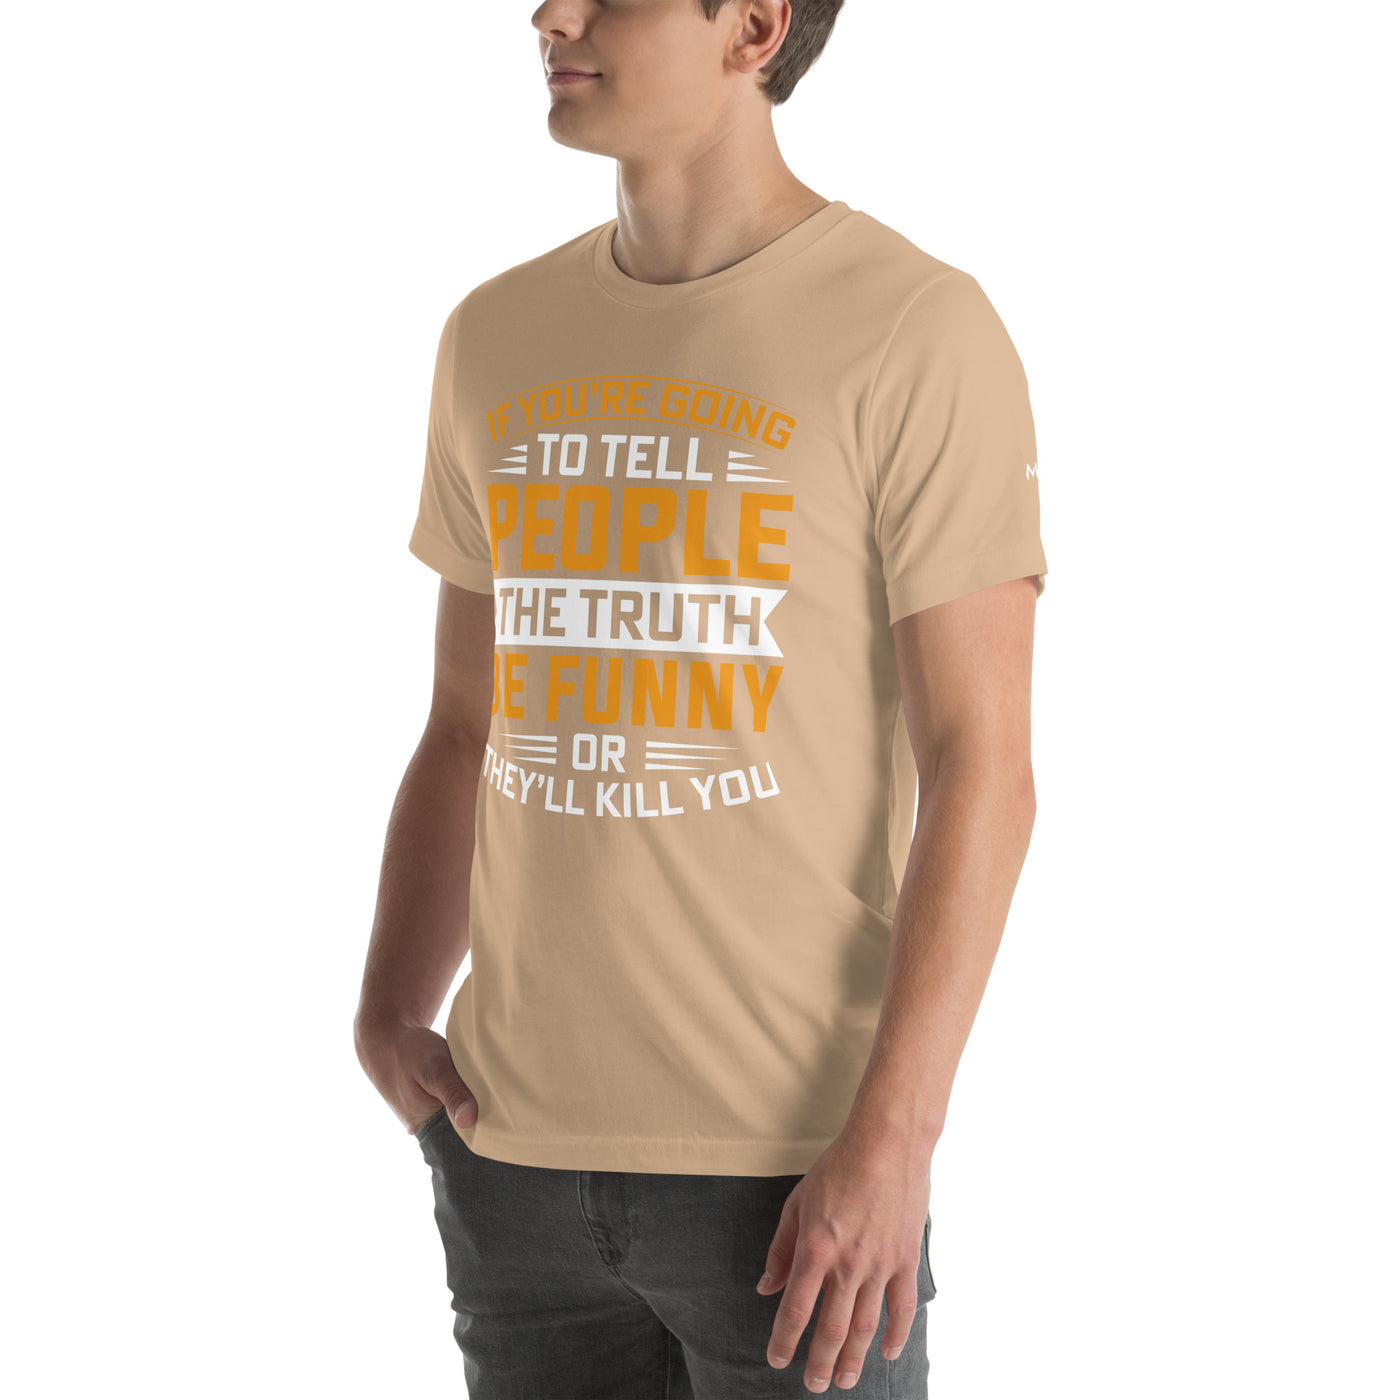 If you are going to tell the people the truth; be funny or they'll kill you - Unisex t-shirt